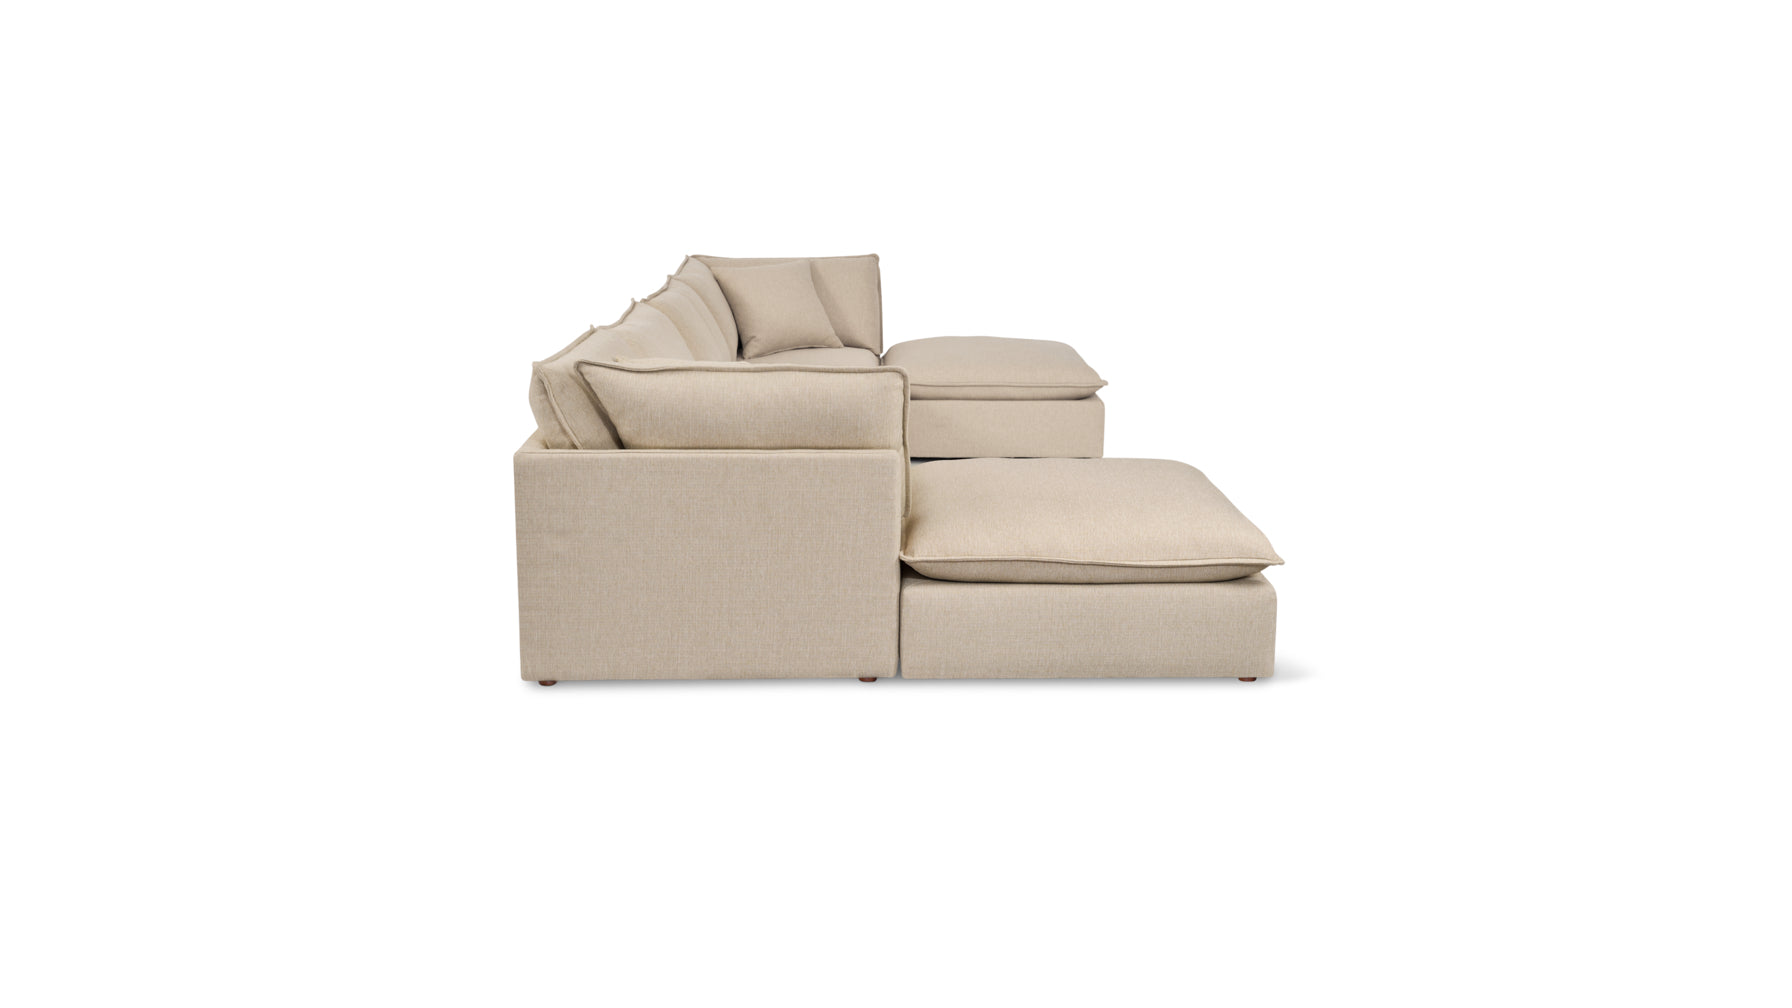 Chill Time 6-Piece Modular U-Shaped Sectional, Biscuit - Image 4